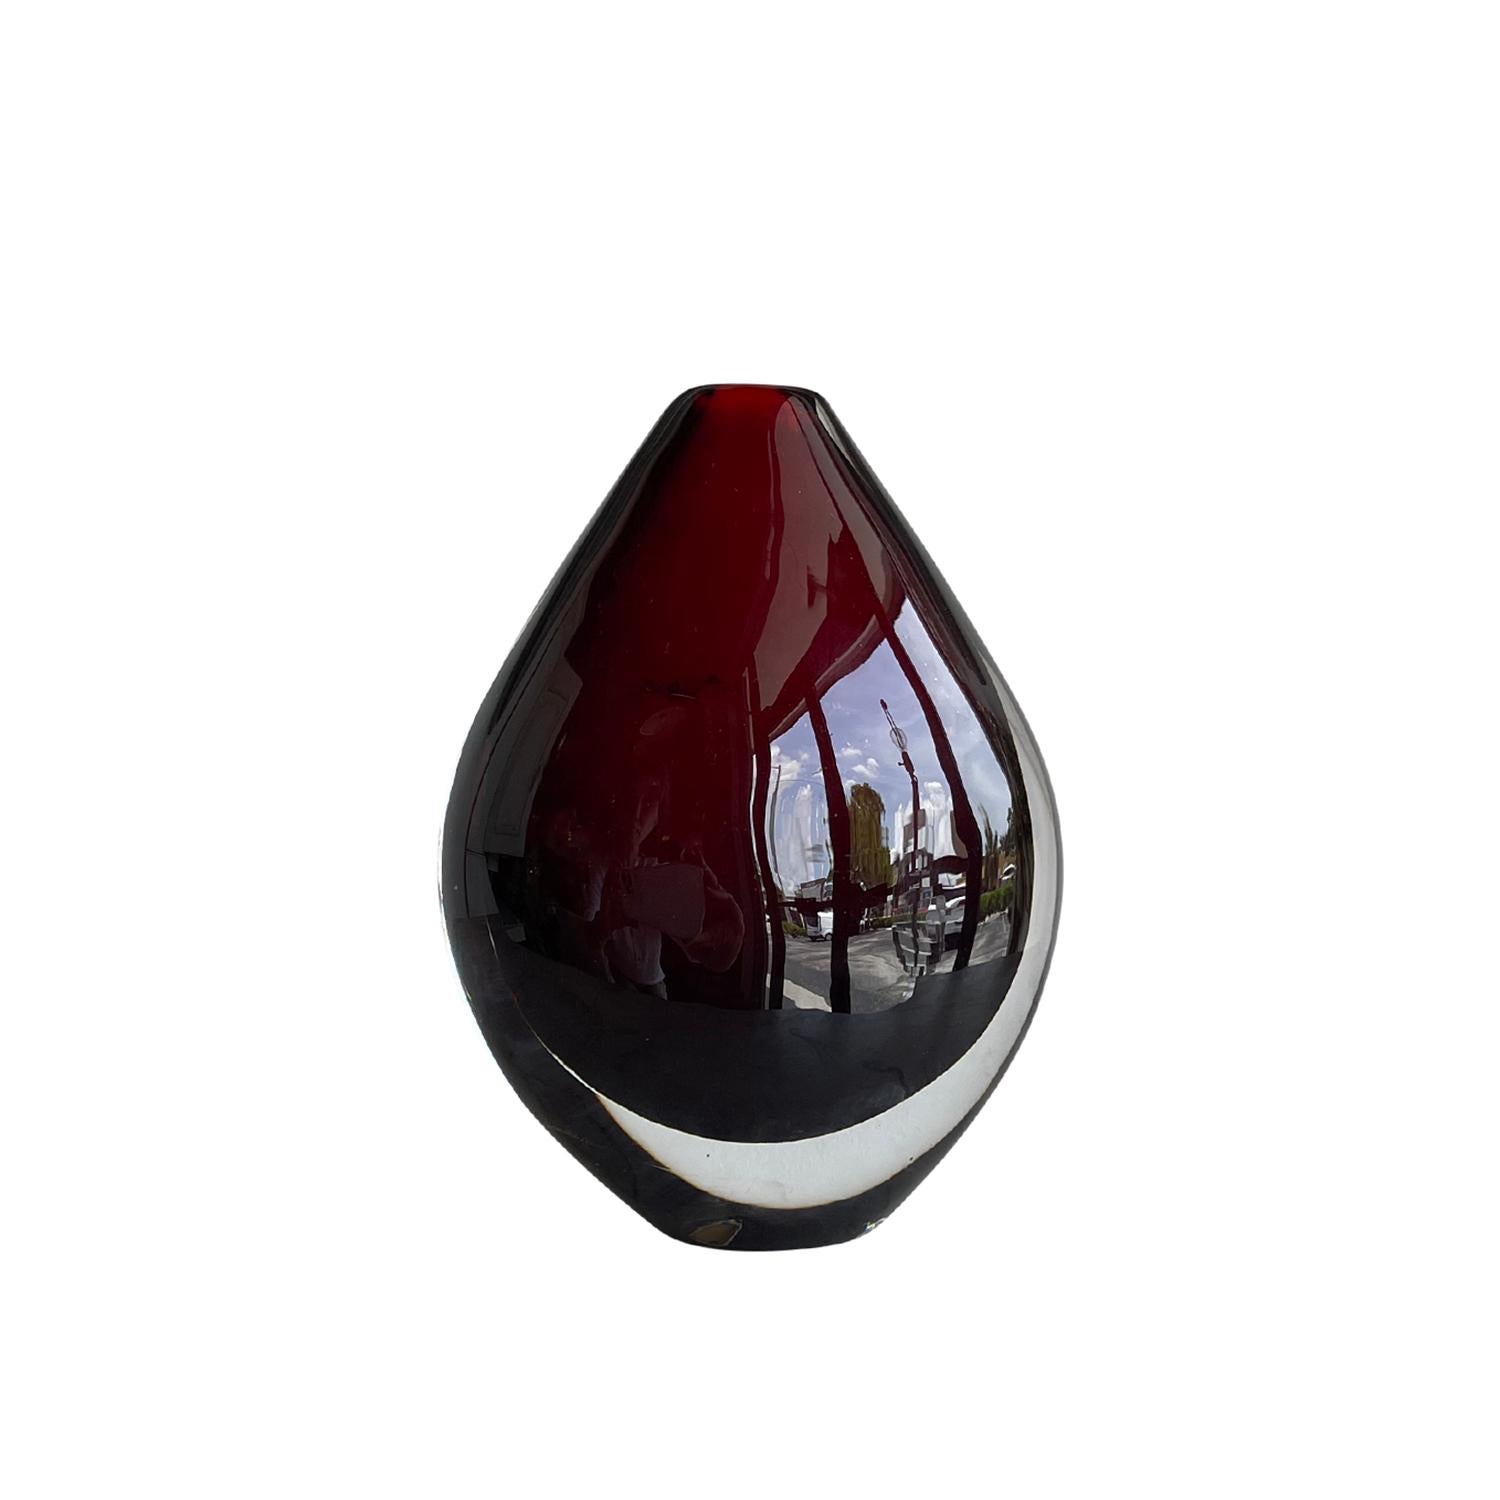 20th Century Dark-Red Swedish Vintage Orrefors Glass Vase by Nils Landberg In Good Condition For Sale In West Palm Beach, FL